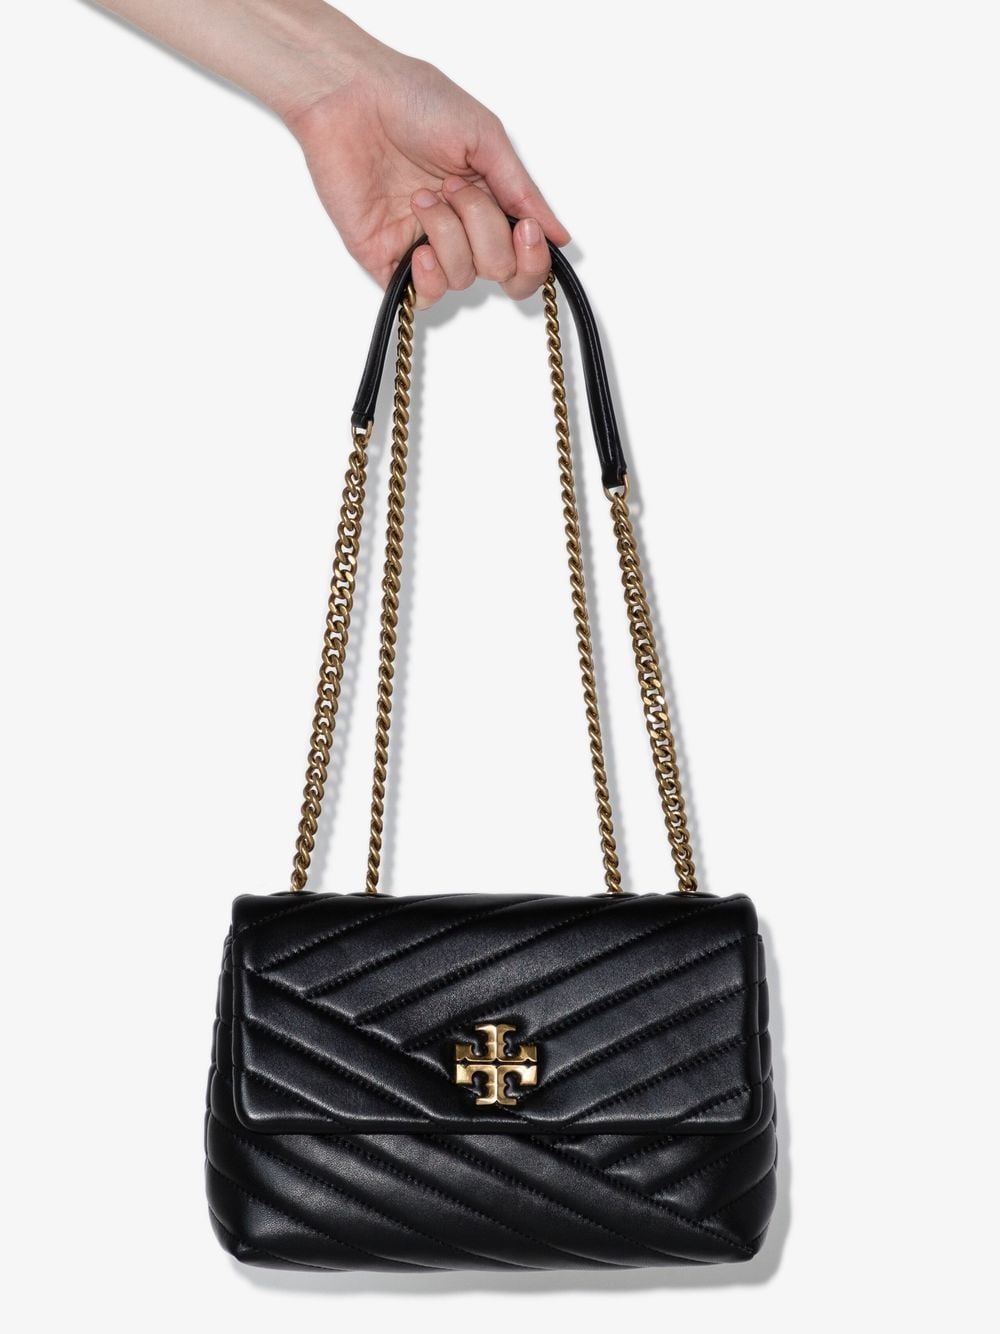 TORY BURCH Small Chevron Quilted Leather Shoulder Bag with Chain Strap and Gold-Tone Accents